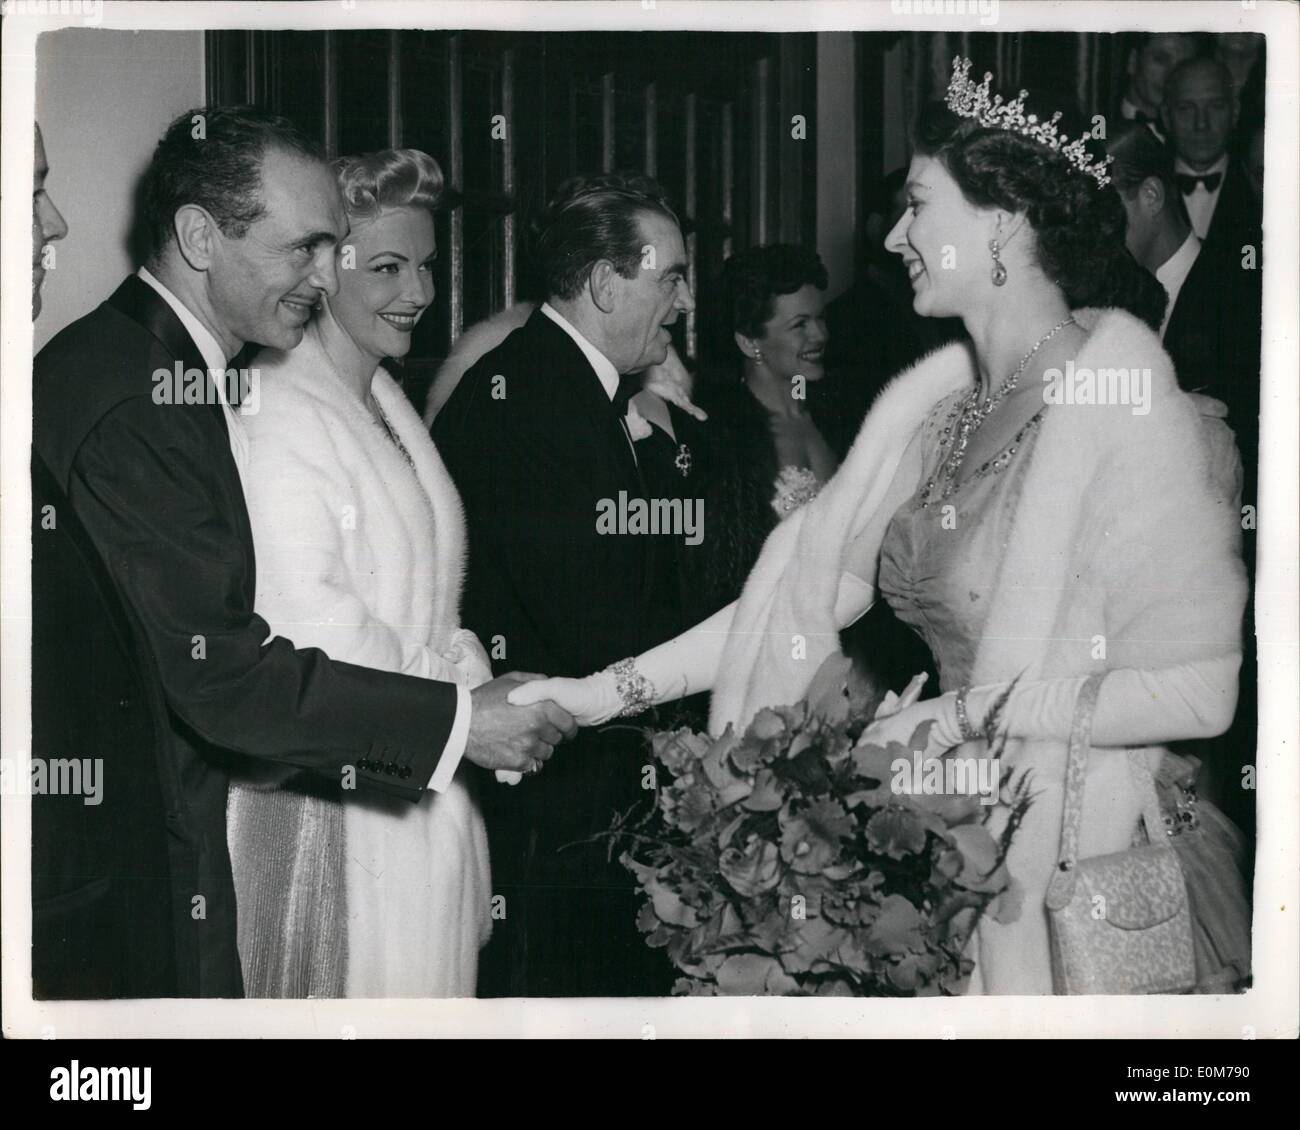 Nov. 11, 1953 - H.M. the Queen Attends Royal Variety Performance. H.M. the Queen, accompanied by the Duke of Edinburgh and Princess Margaret, last night attended the Royal Variety Performance of ''Guys and Dolls'', at the London Coliseum. After the performance, some of the artist were presented to H.M. The Queen. OPS: H.M. The Queen shaking hands with some of the artists. To be seen are Vivian Blaine, Jimmy James and on the right is Eve Boswell. Stock Photo